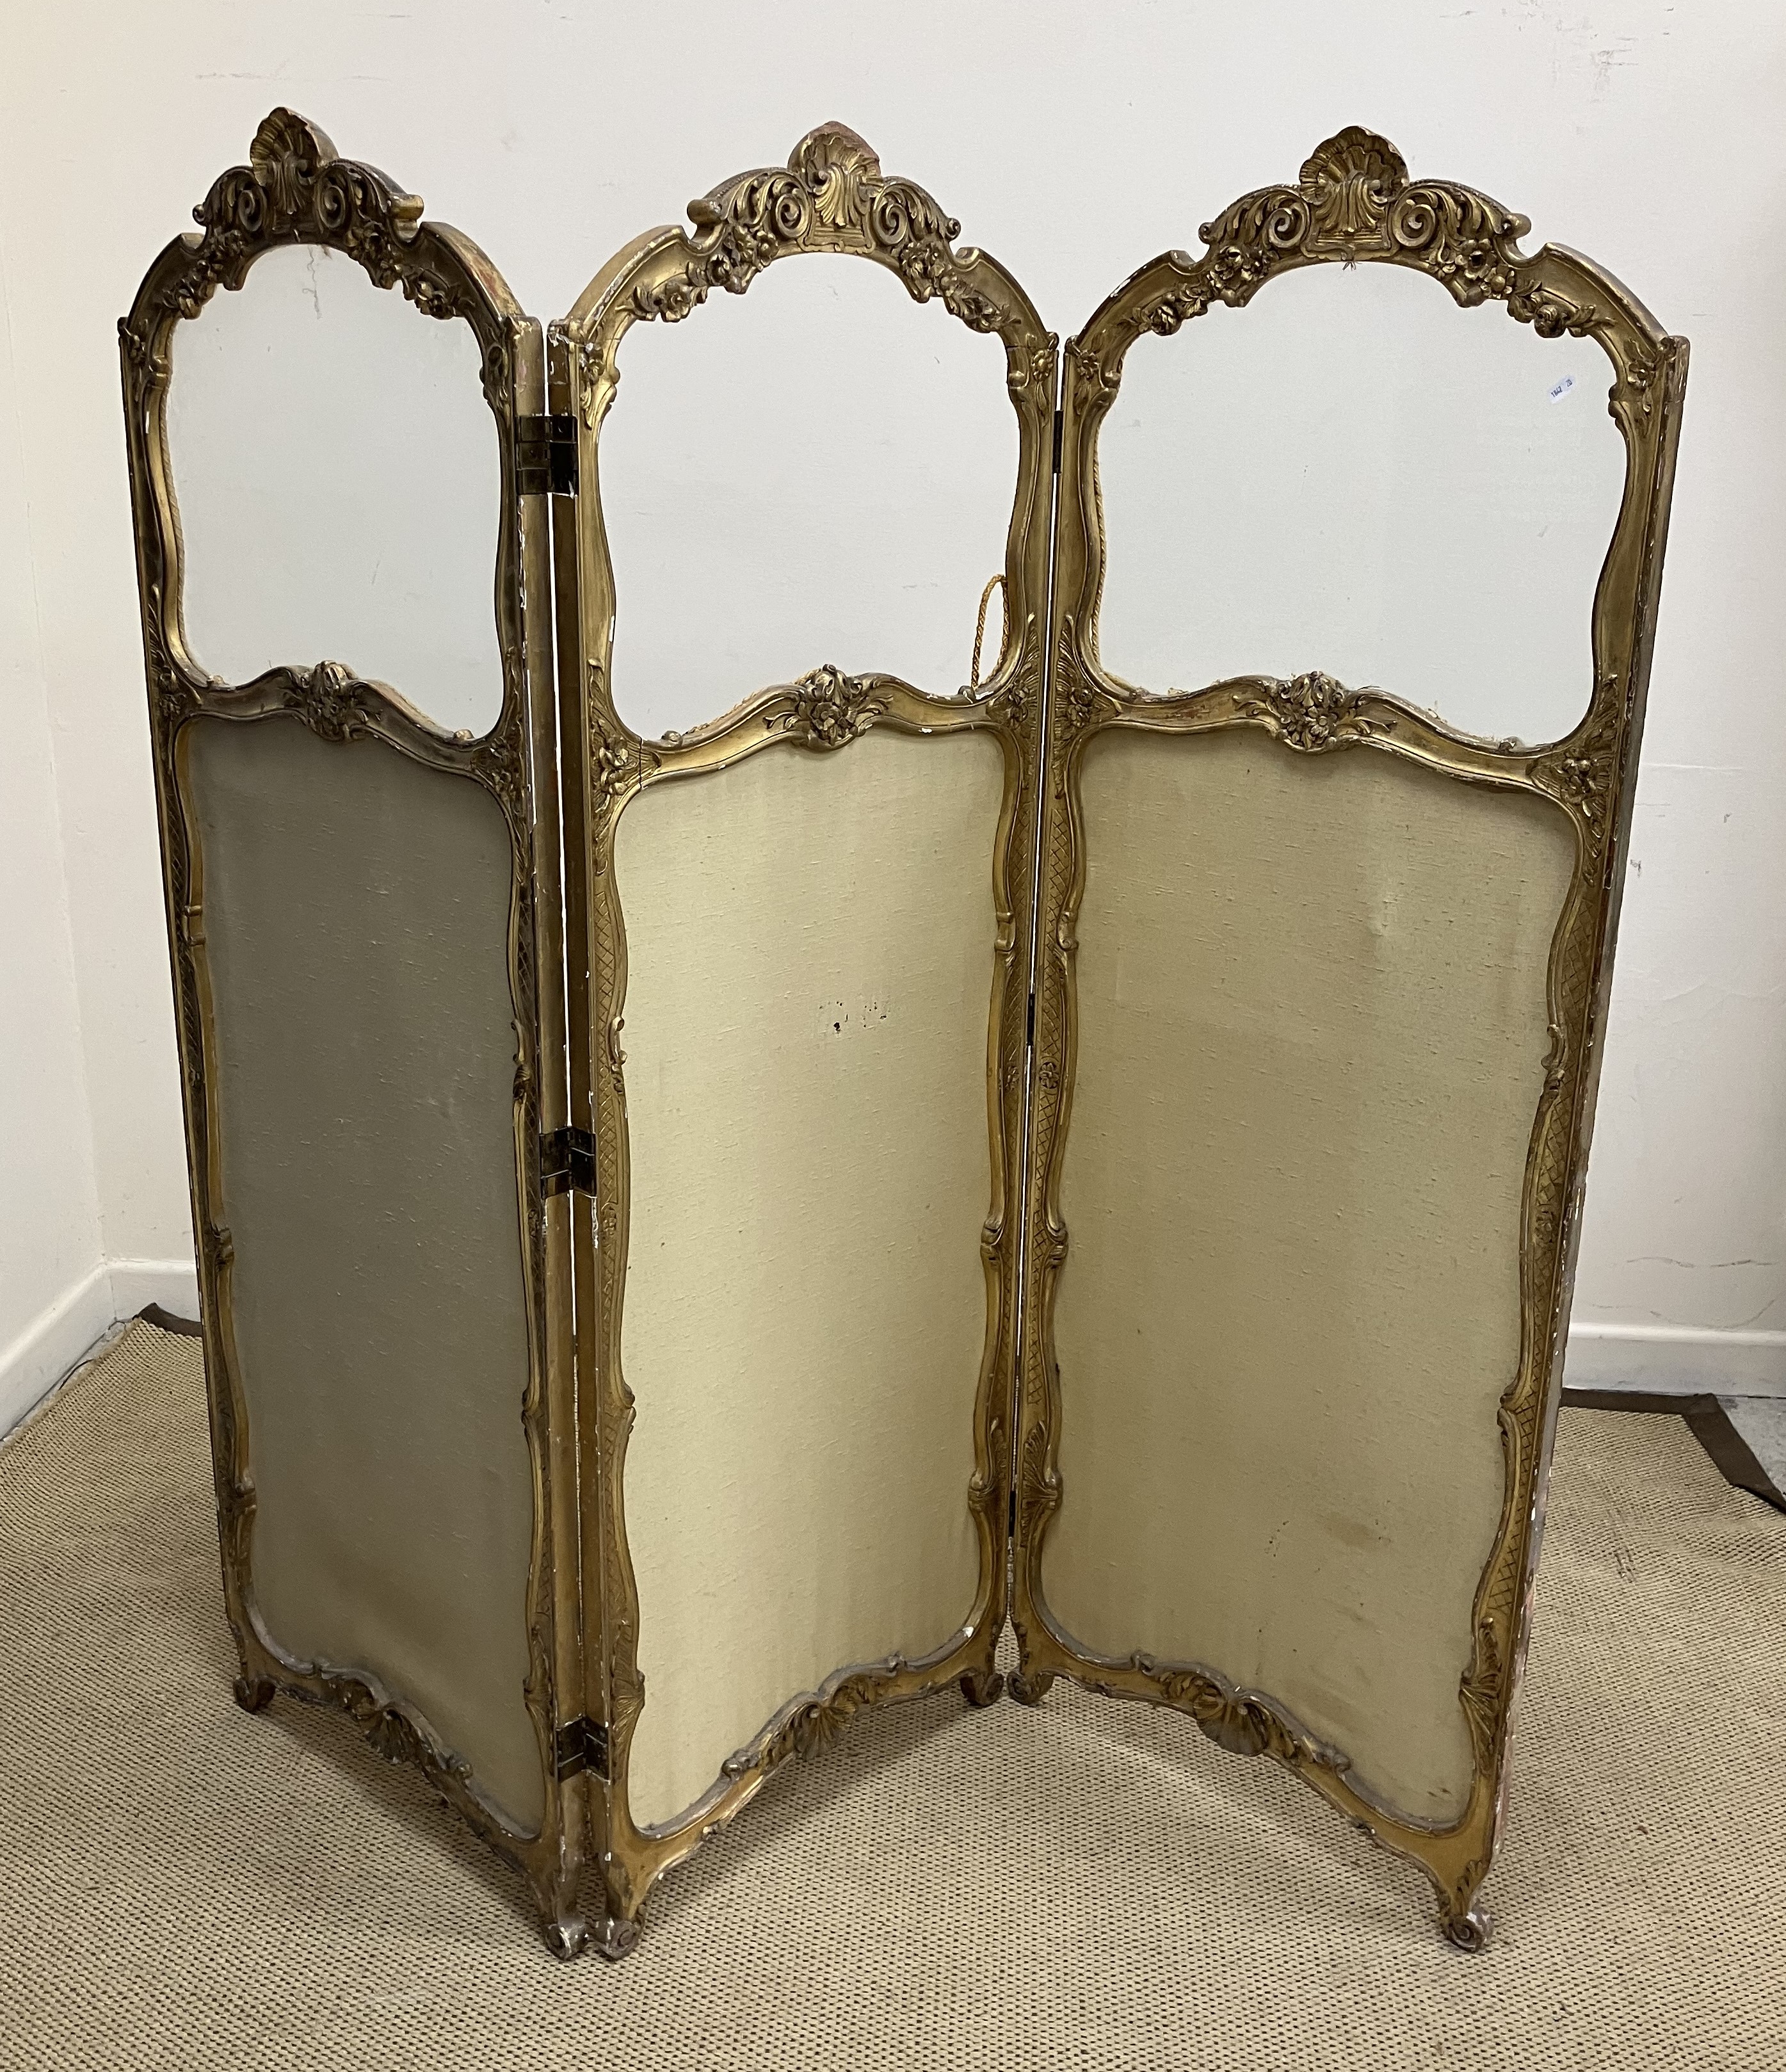 A circa 1900 carved giltwood and gesso framed dressing screen in the Louis XV taste with foliate